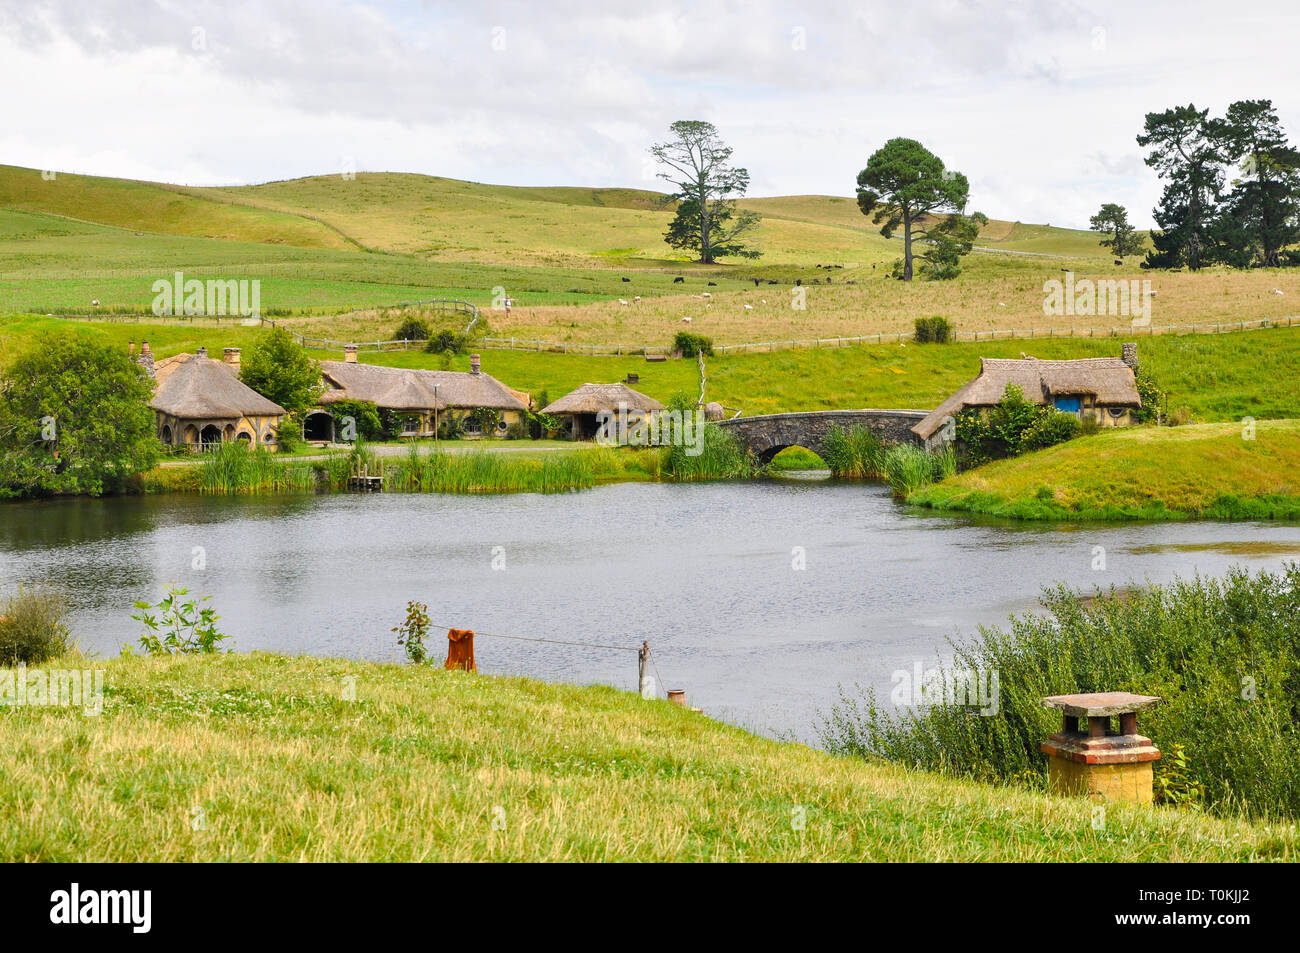 Hobbiton Movie Set - Location for the Lord of the Rings and The Hobbit films. Pub, inn, bridge, mill. Visitor attraction in Waikato region New Zealand Stock Photo